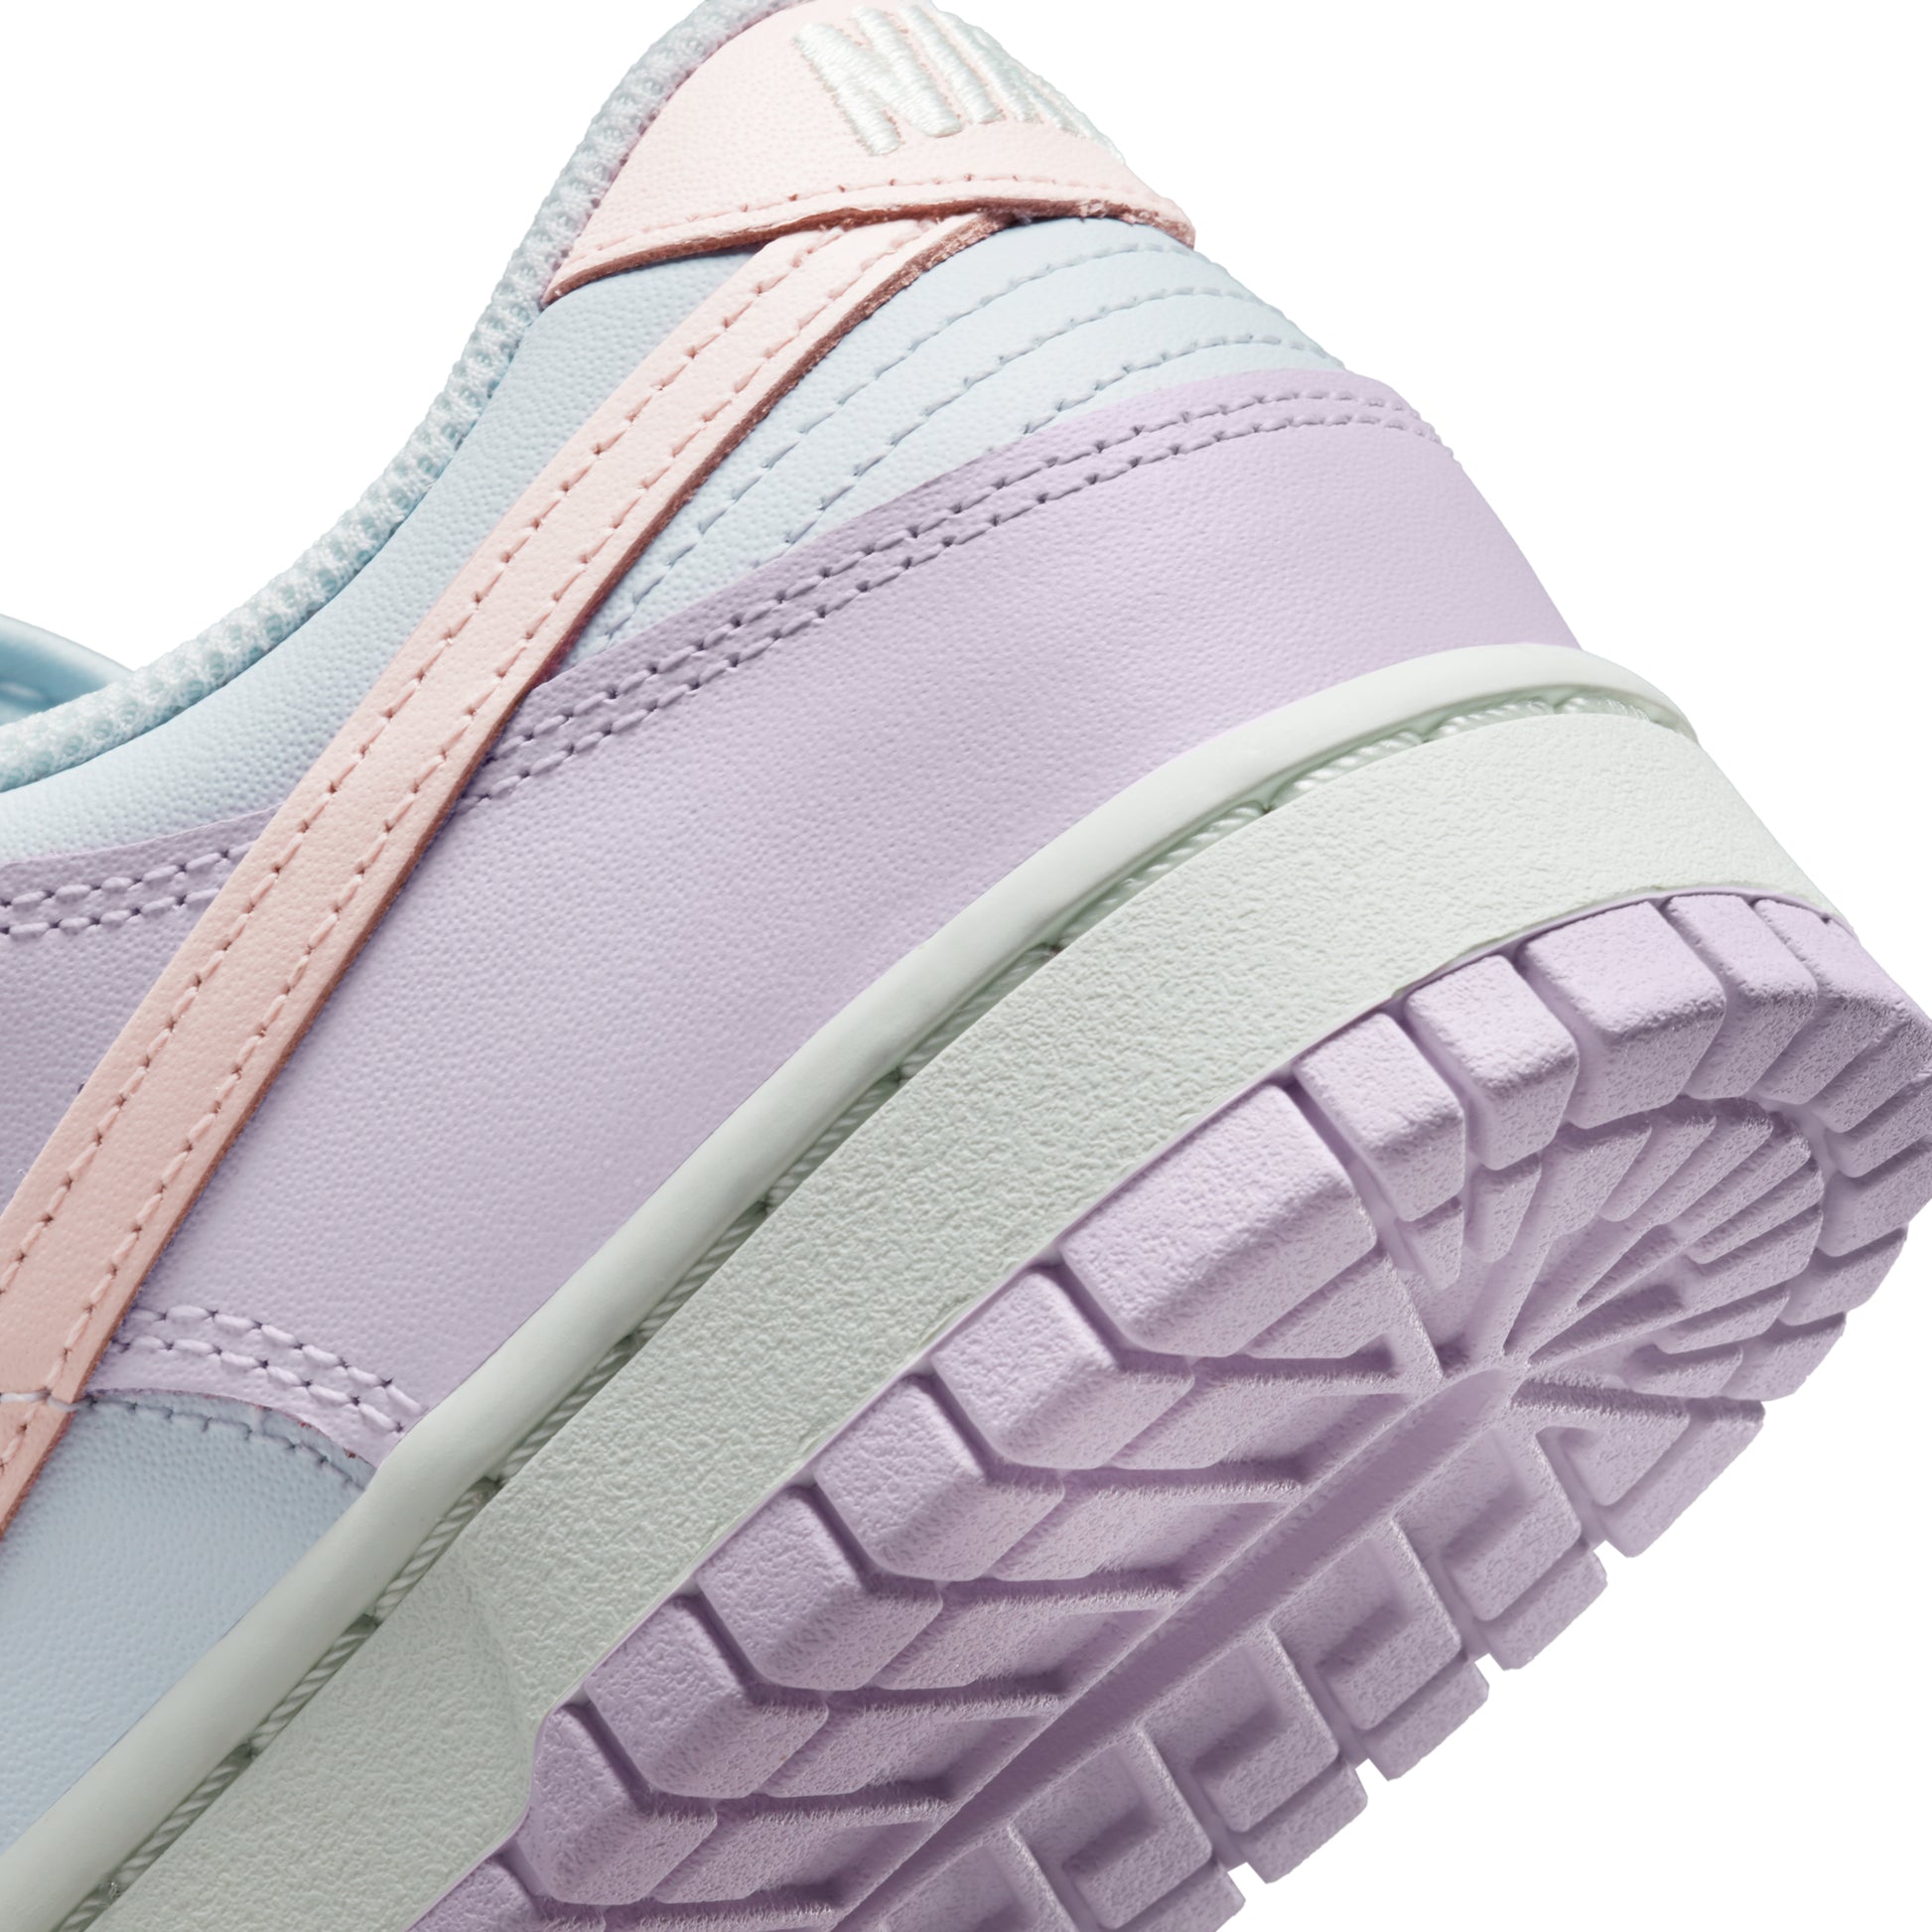 dunk low easter womens 2022